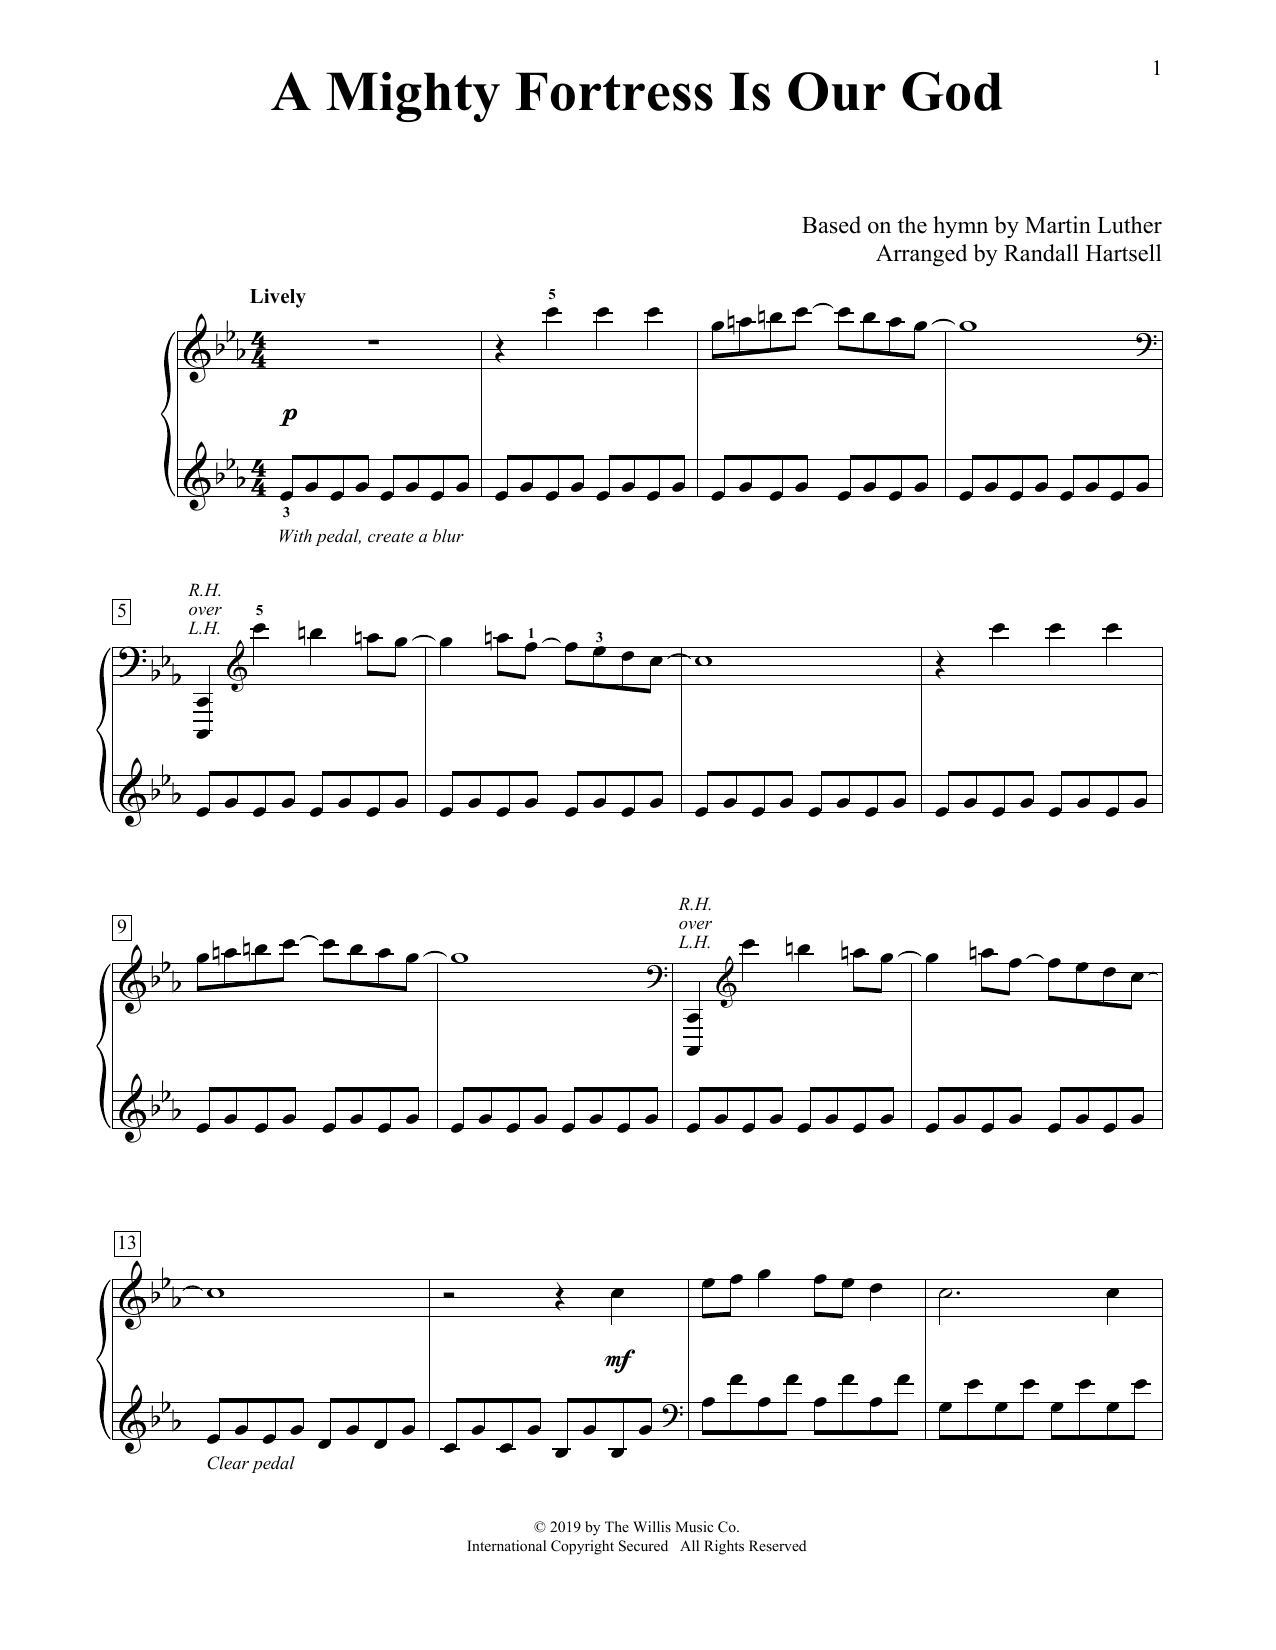 Martin Luther A Mighty Fortress Is Our God (arr. Randall Hartsell) sheet music notes printable PDF score